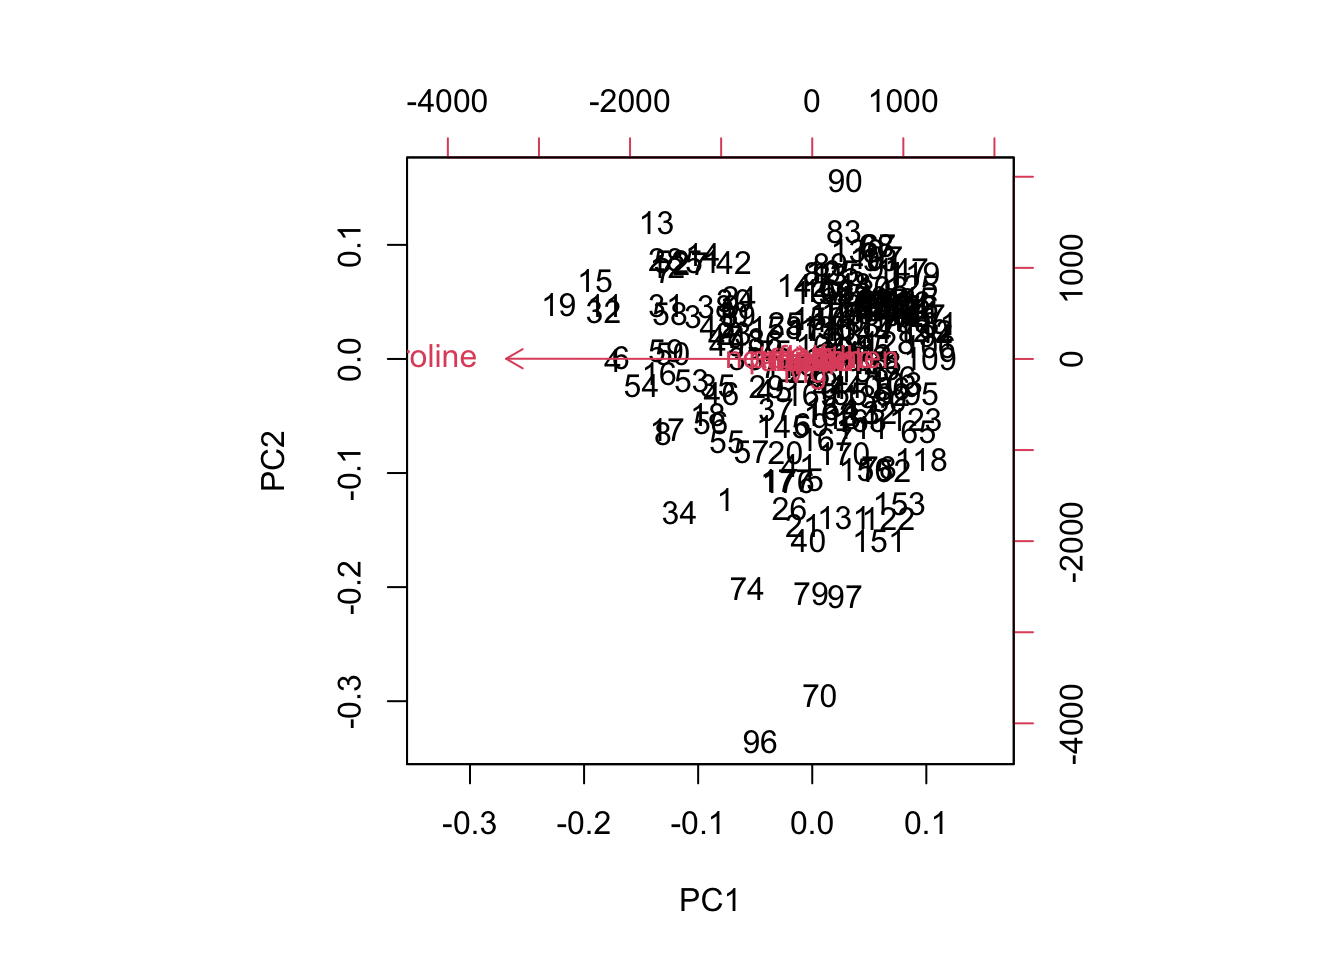 Biplot of the first two principal components of unstandardized (raw) data for comparison.